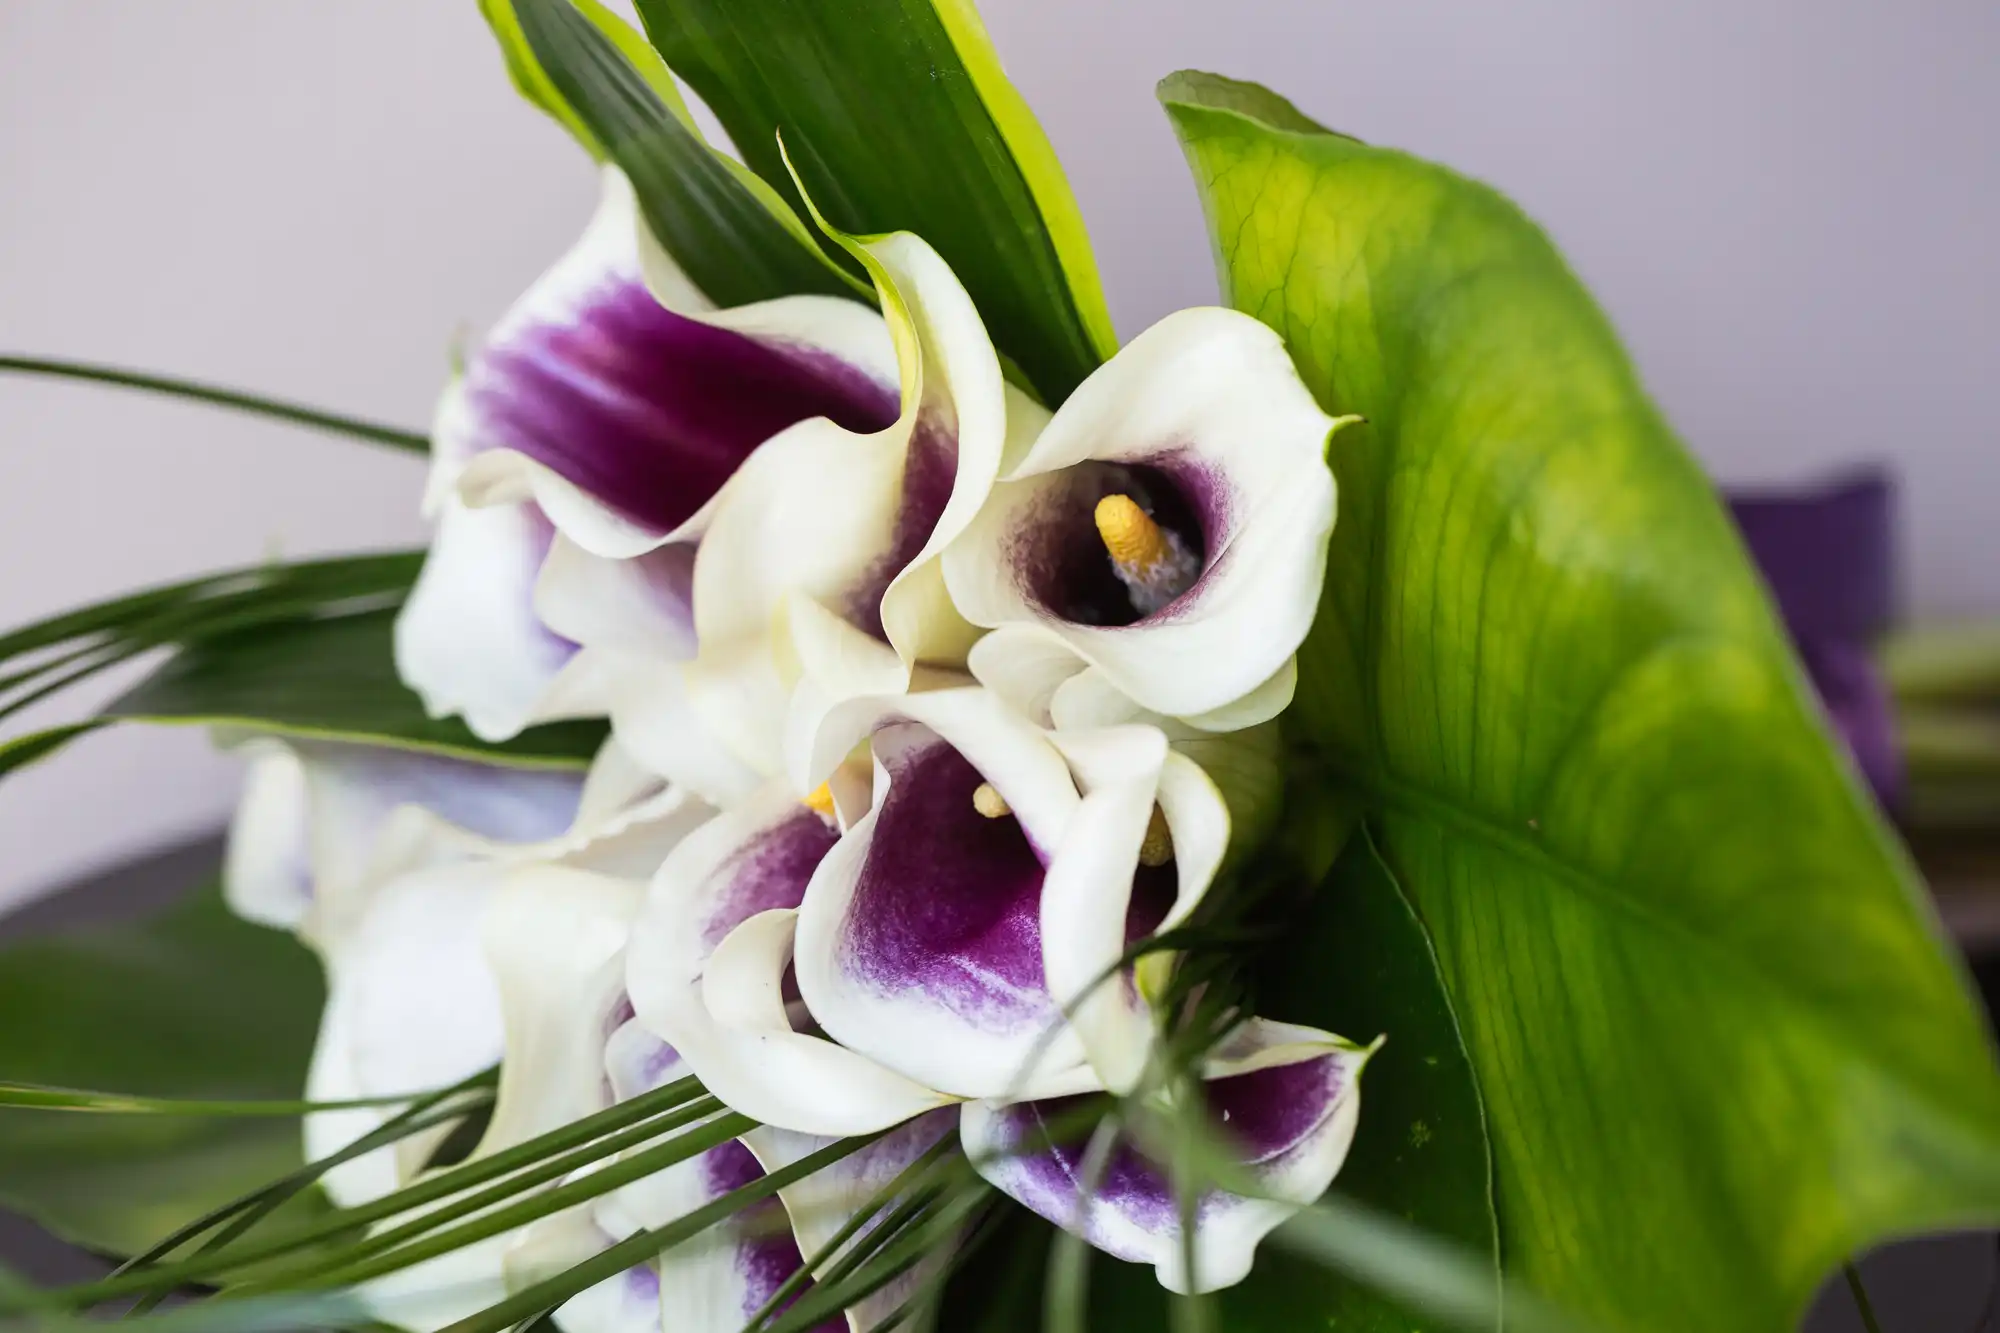 Close-up of white and purple calla lilies with green leaves on a blurred background.